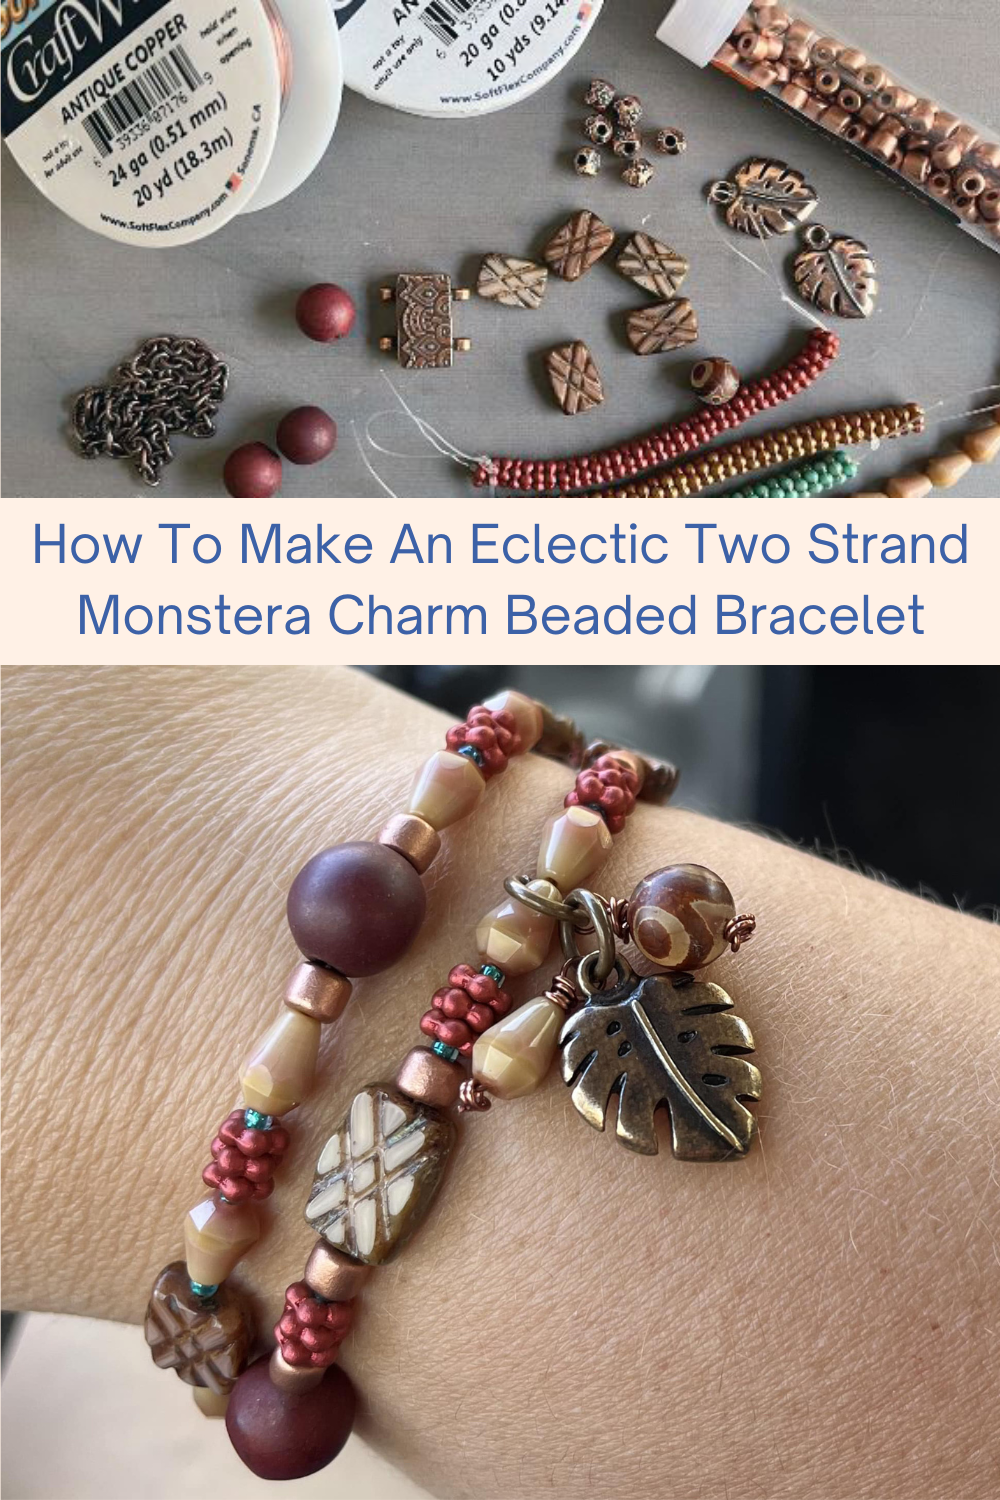 How To Make An Eclectic Two Strand Monstera Charm Beaded Bracelet Collage